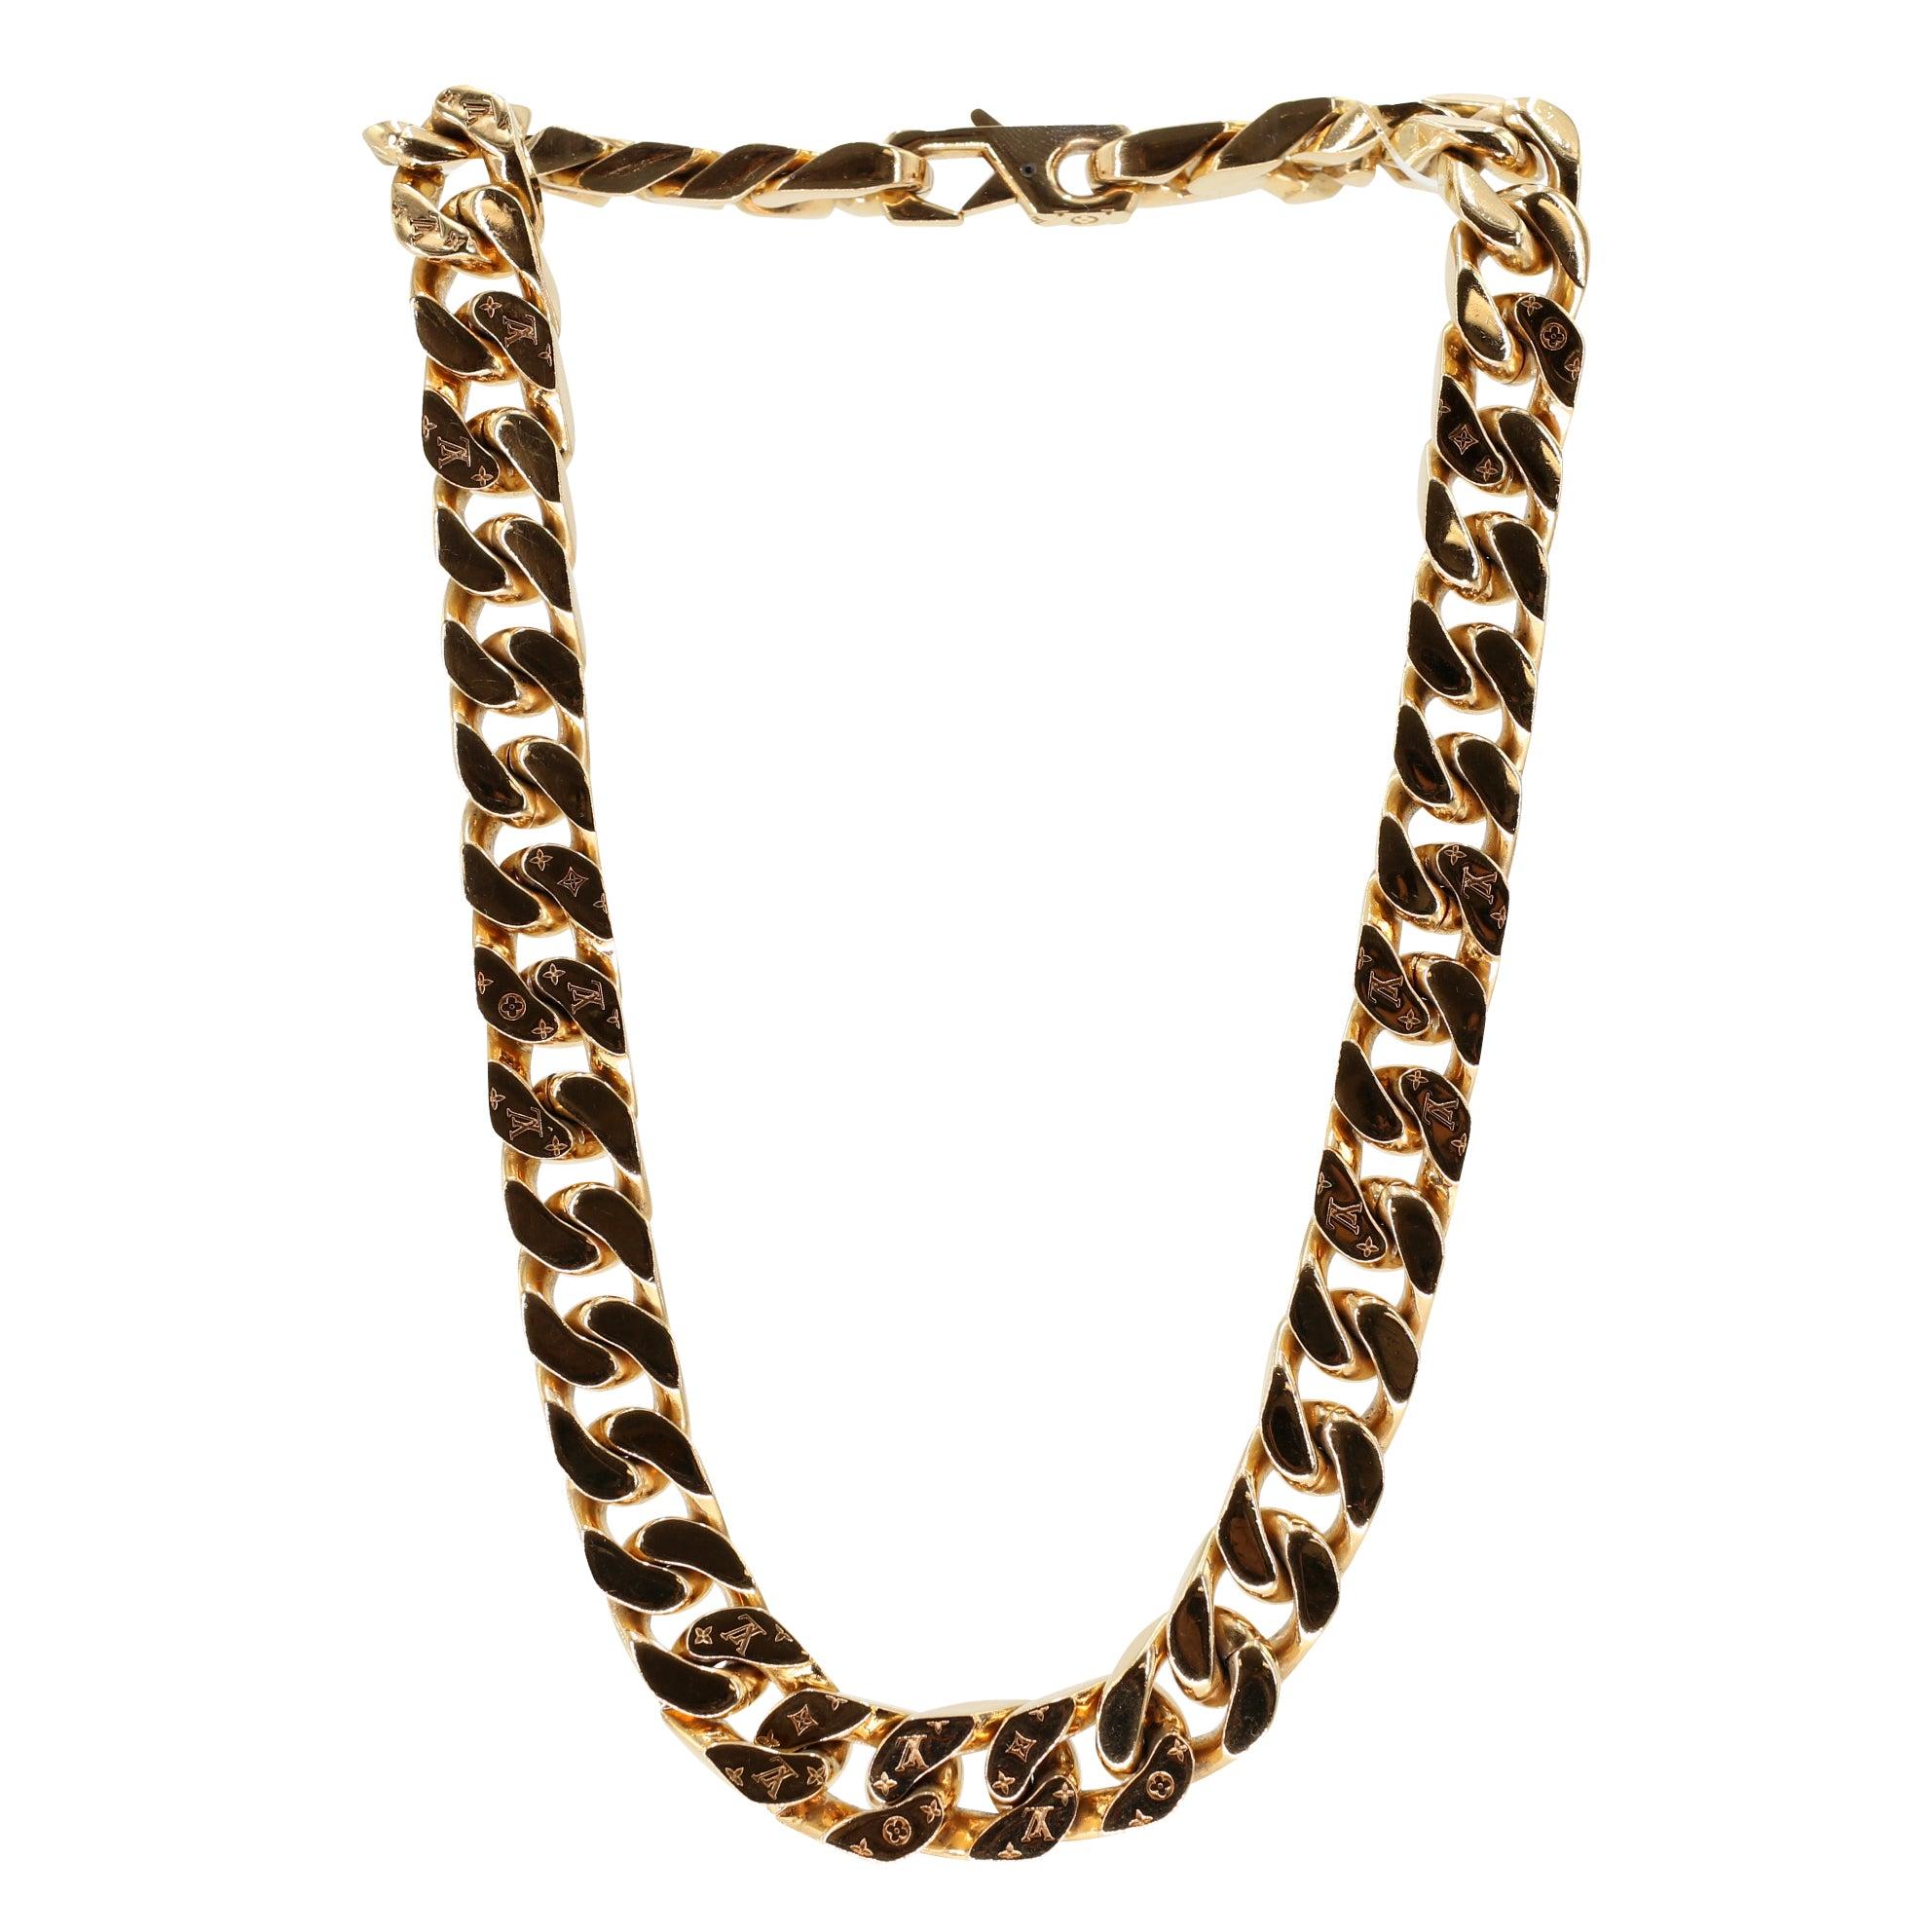 Here is another beautiful creation by the world famous fashion house Louis Vuitton. Authentic jewelry.

Limited Edition Louis Vuitton necklace The Collier Chain Links, a Louis Vuitton favorite, has been updated with a glossy, vibrant finish. The